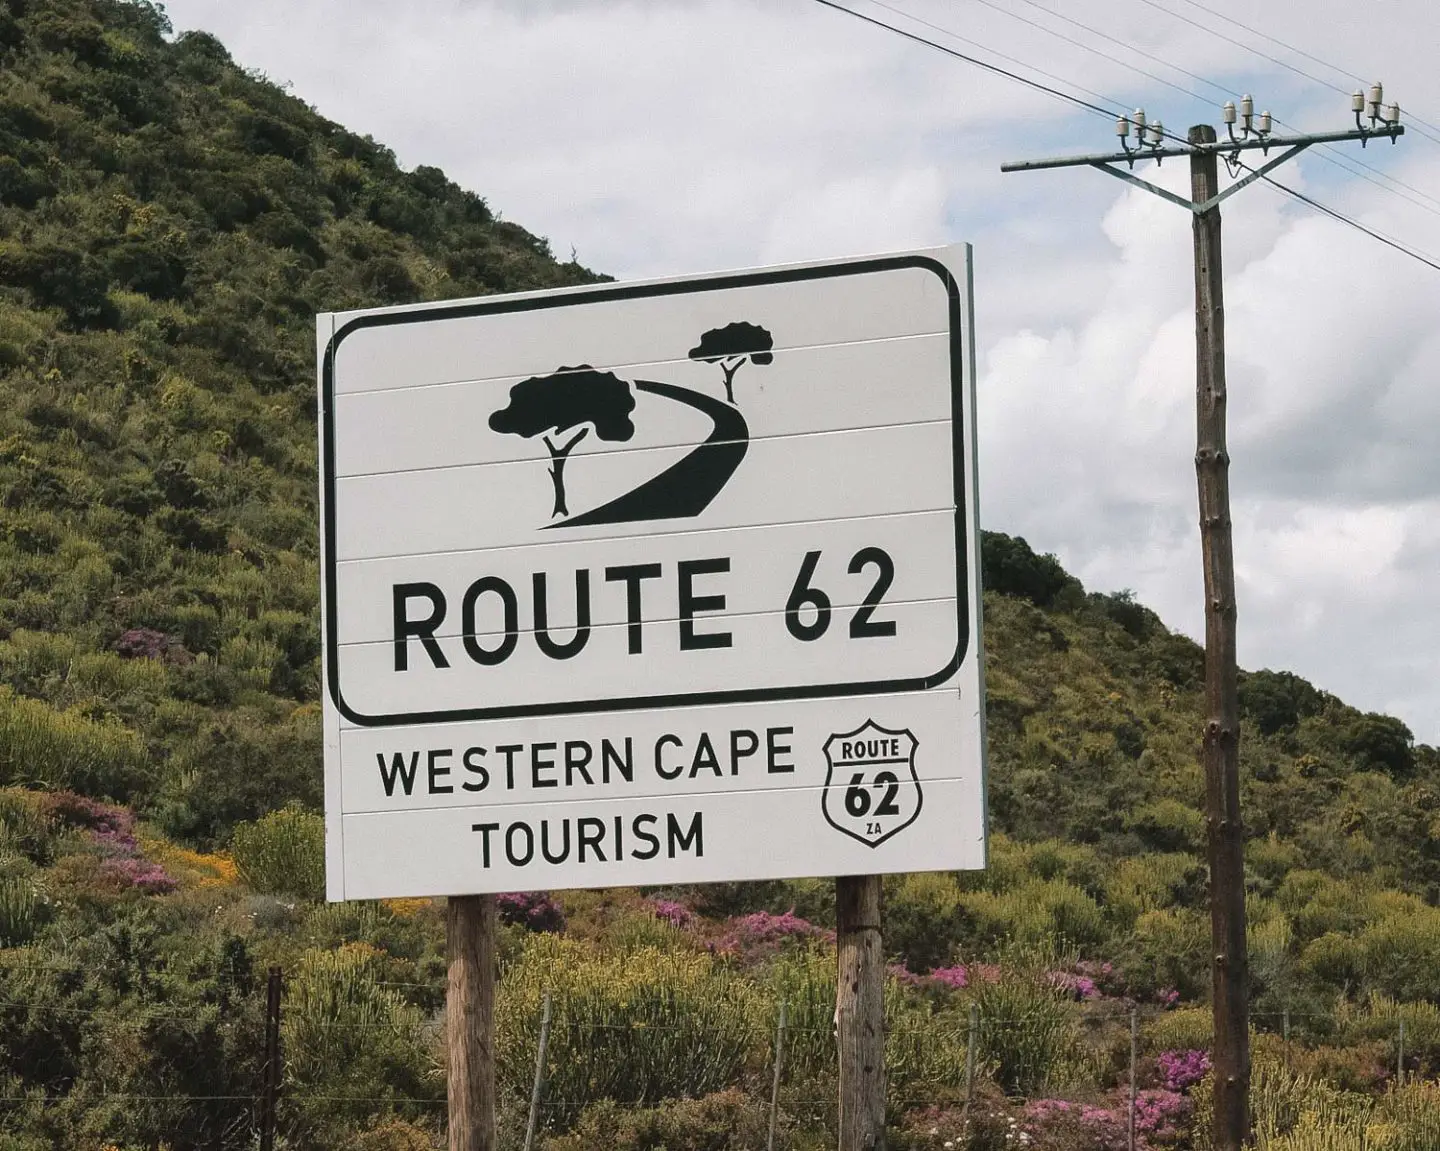 Take Route 62 Instead of the N2